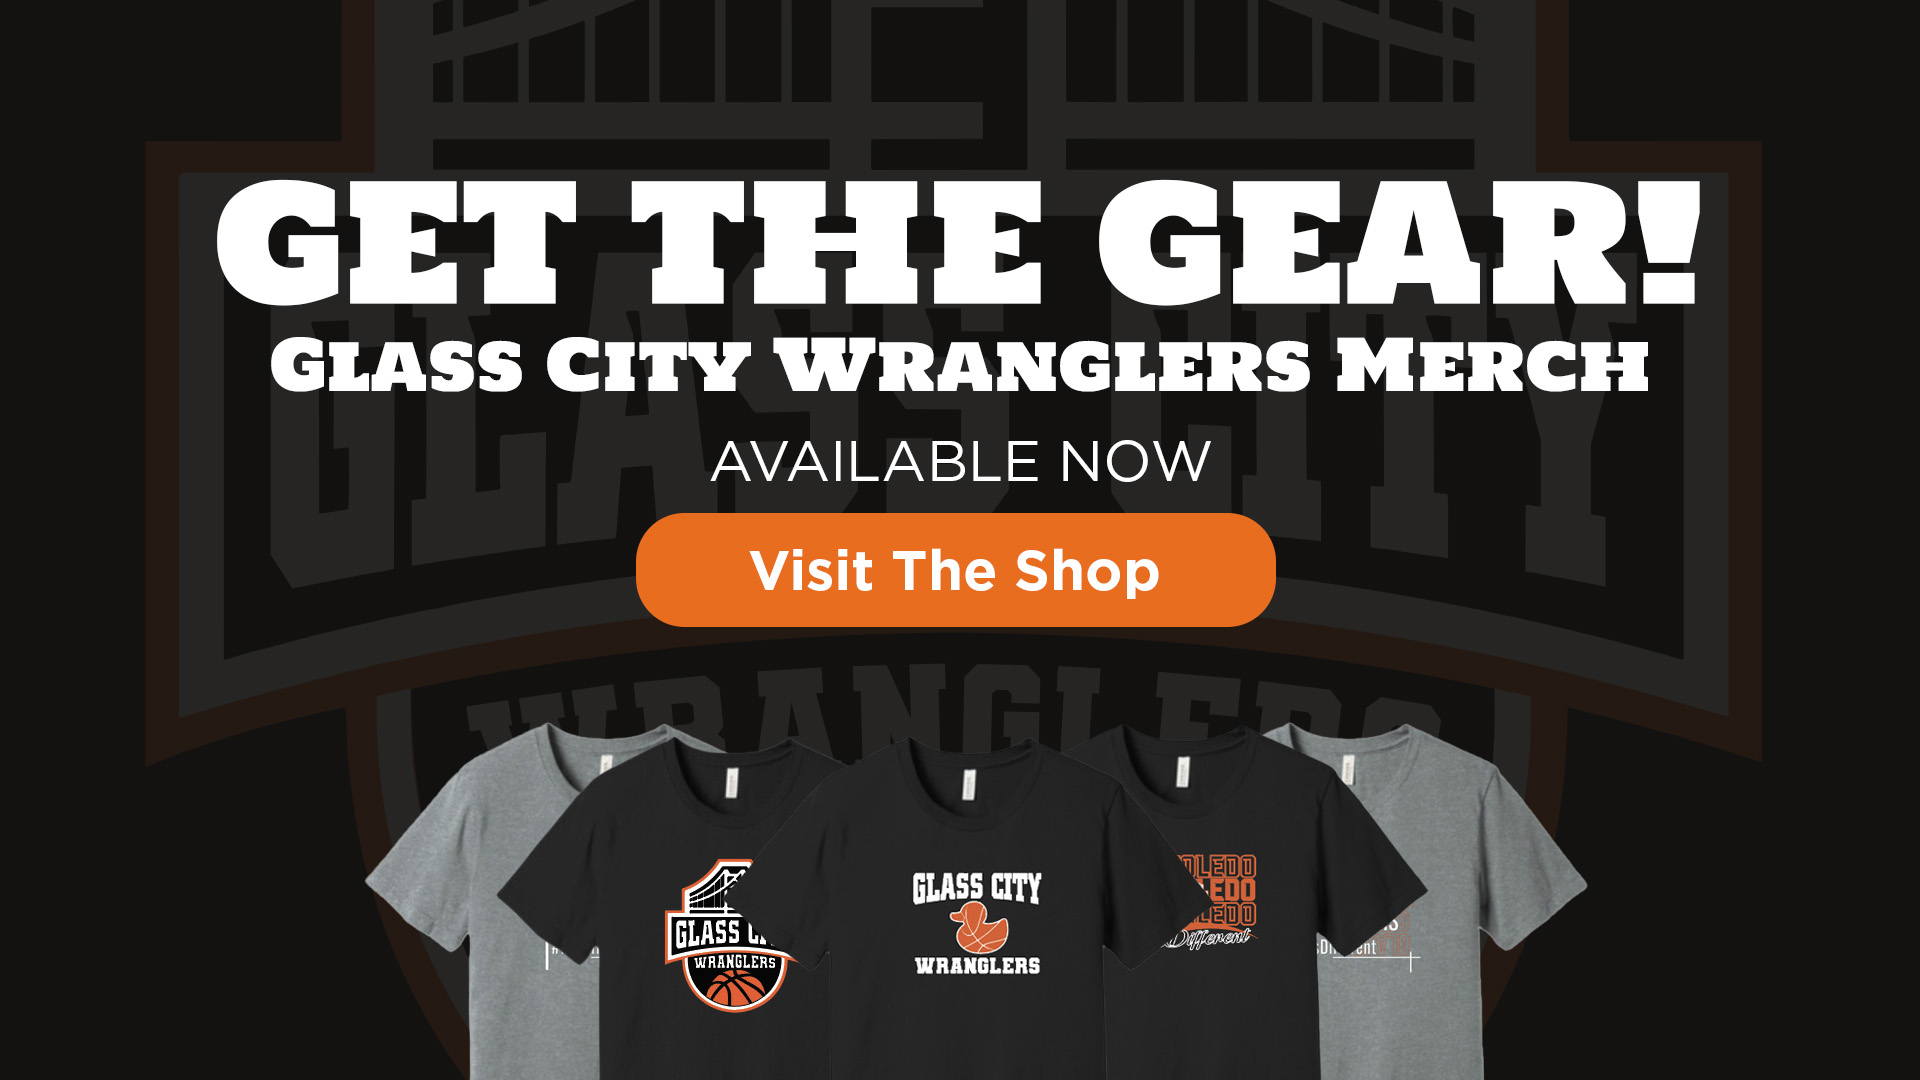 Glass City Wranglers Merchandise Available Now